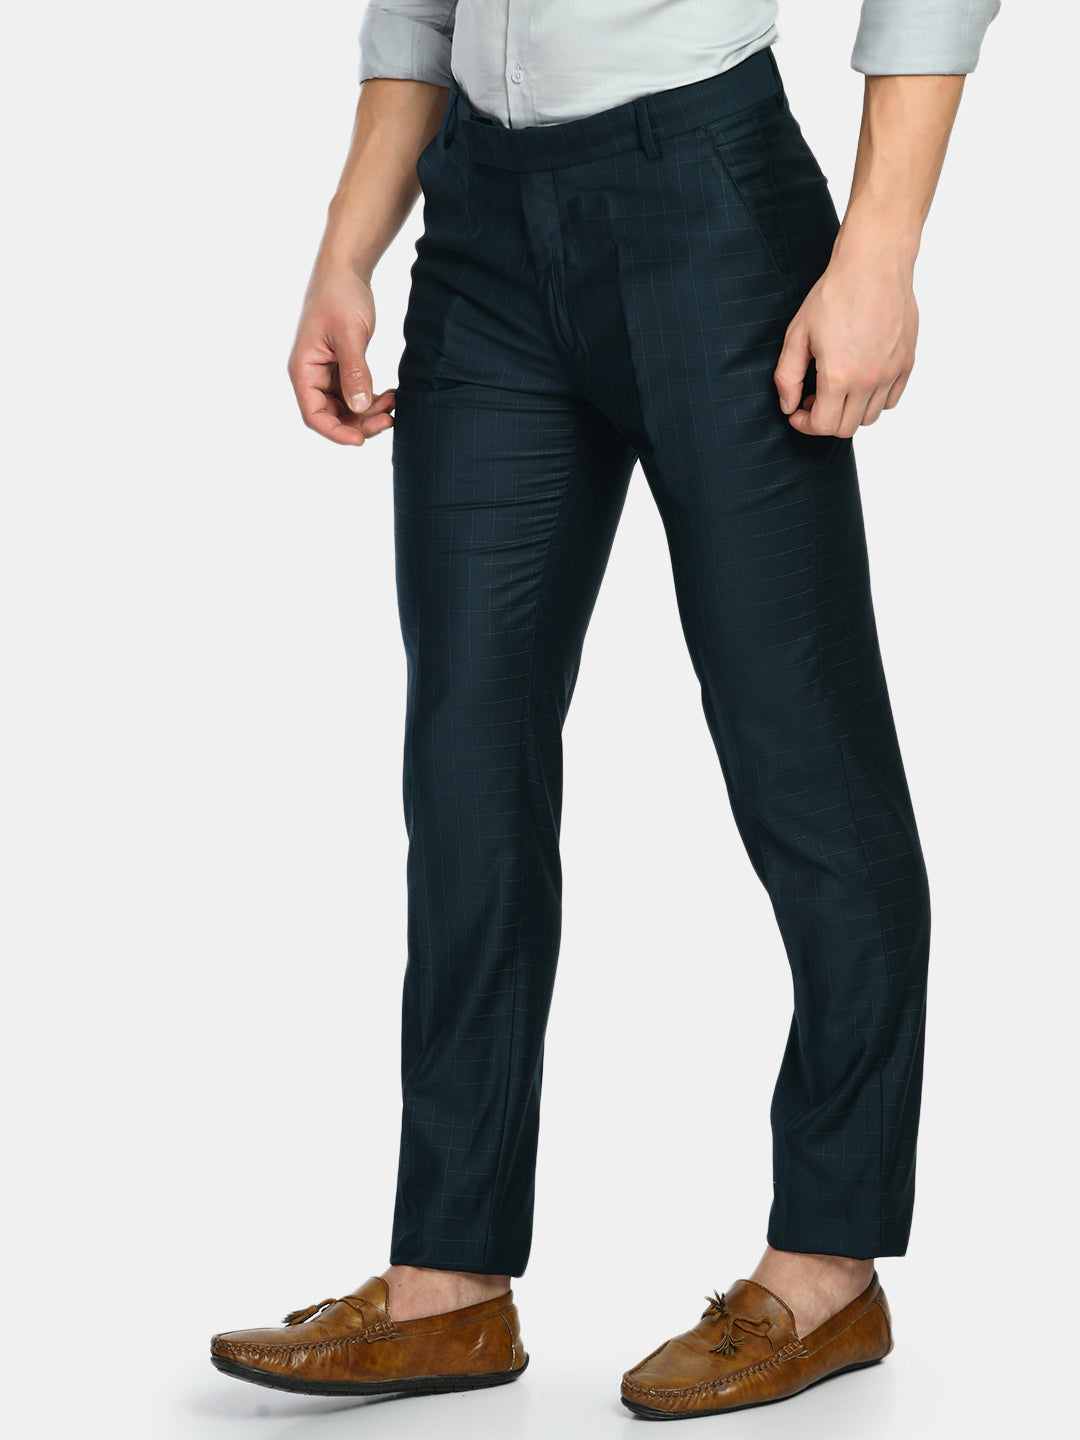 Cotton Blend Solid Slim Fit Formal Trouser – Get some goodies